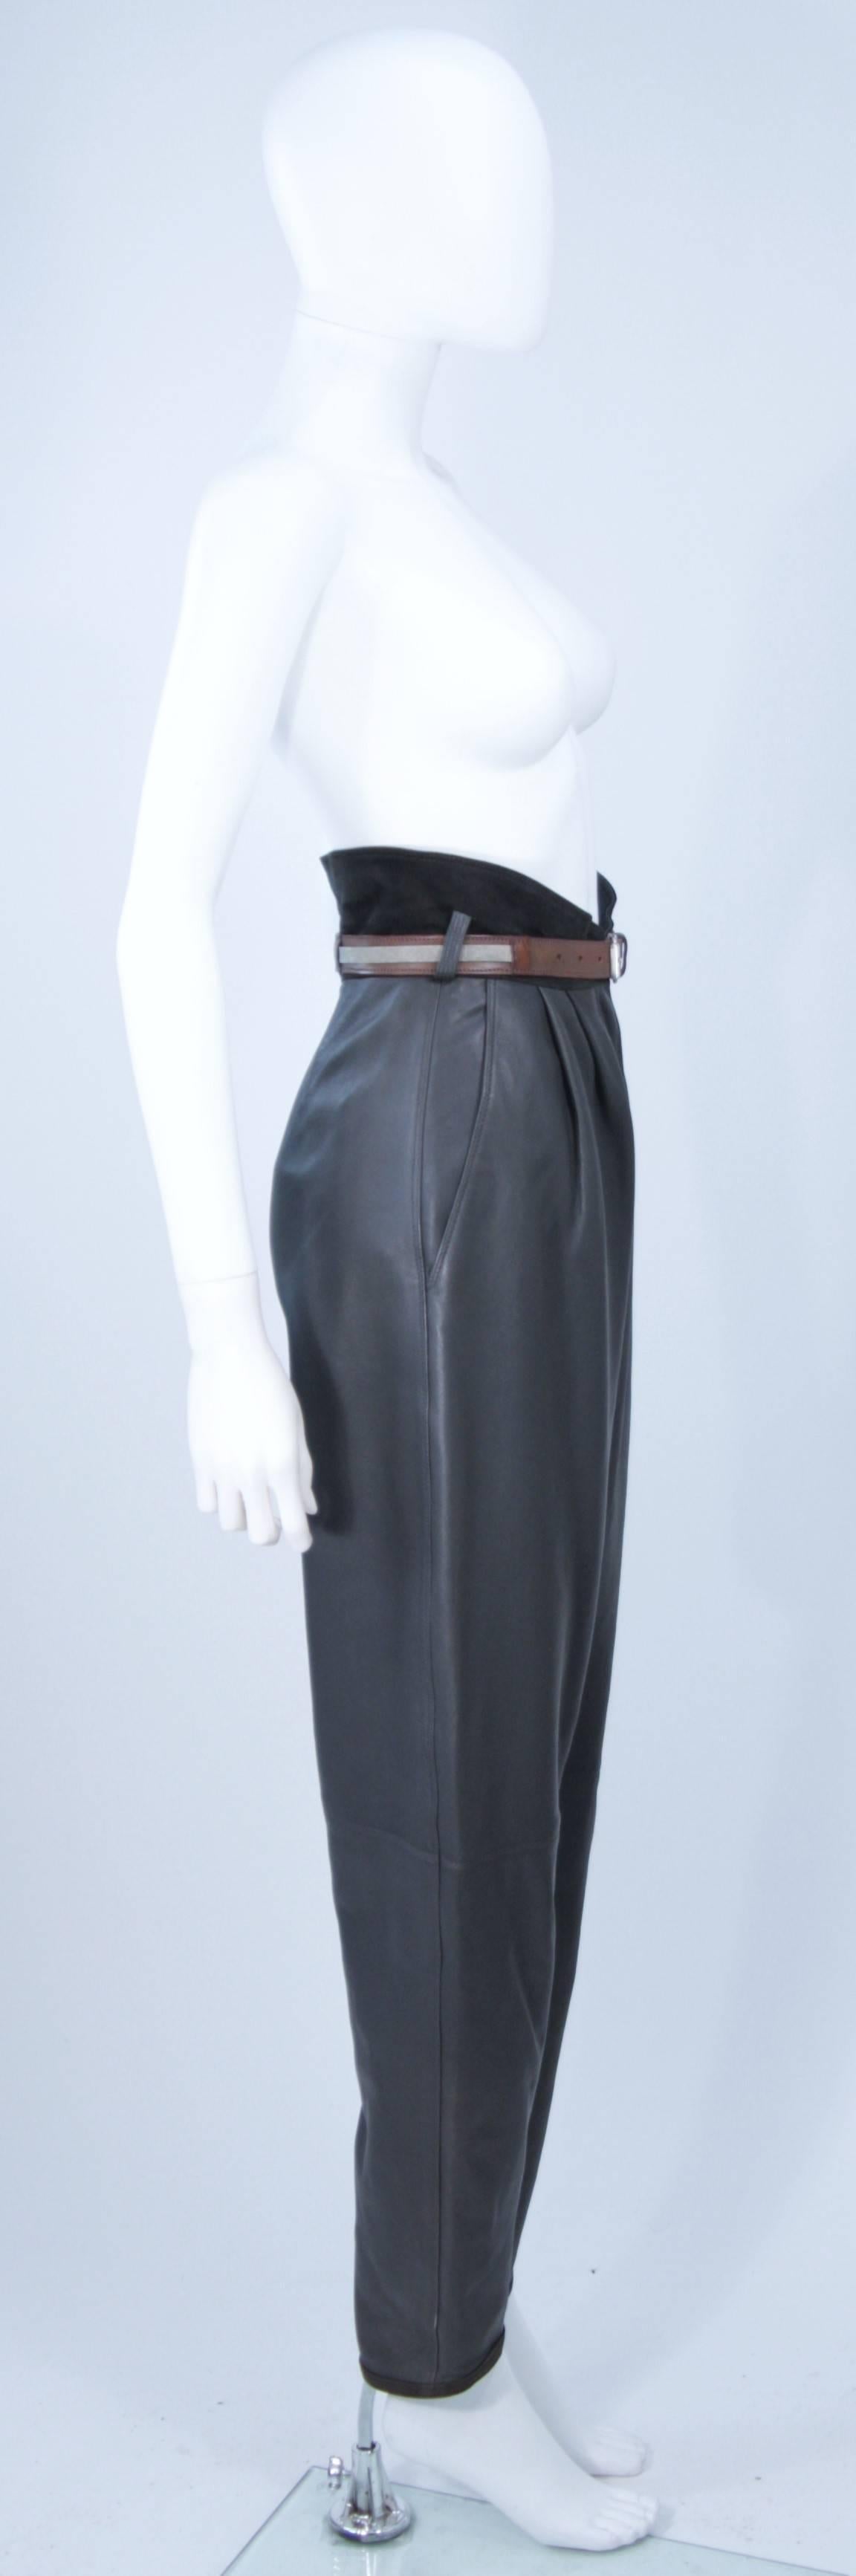 GIANNI VERSACE Leather Vest and Trouser Ensemble with Metal Studs Size 2-4 1